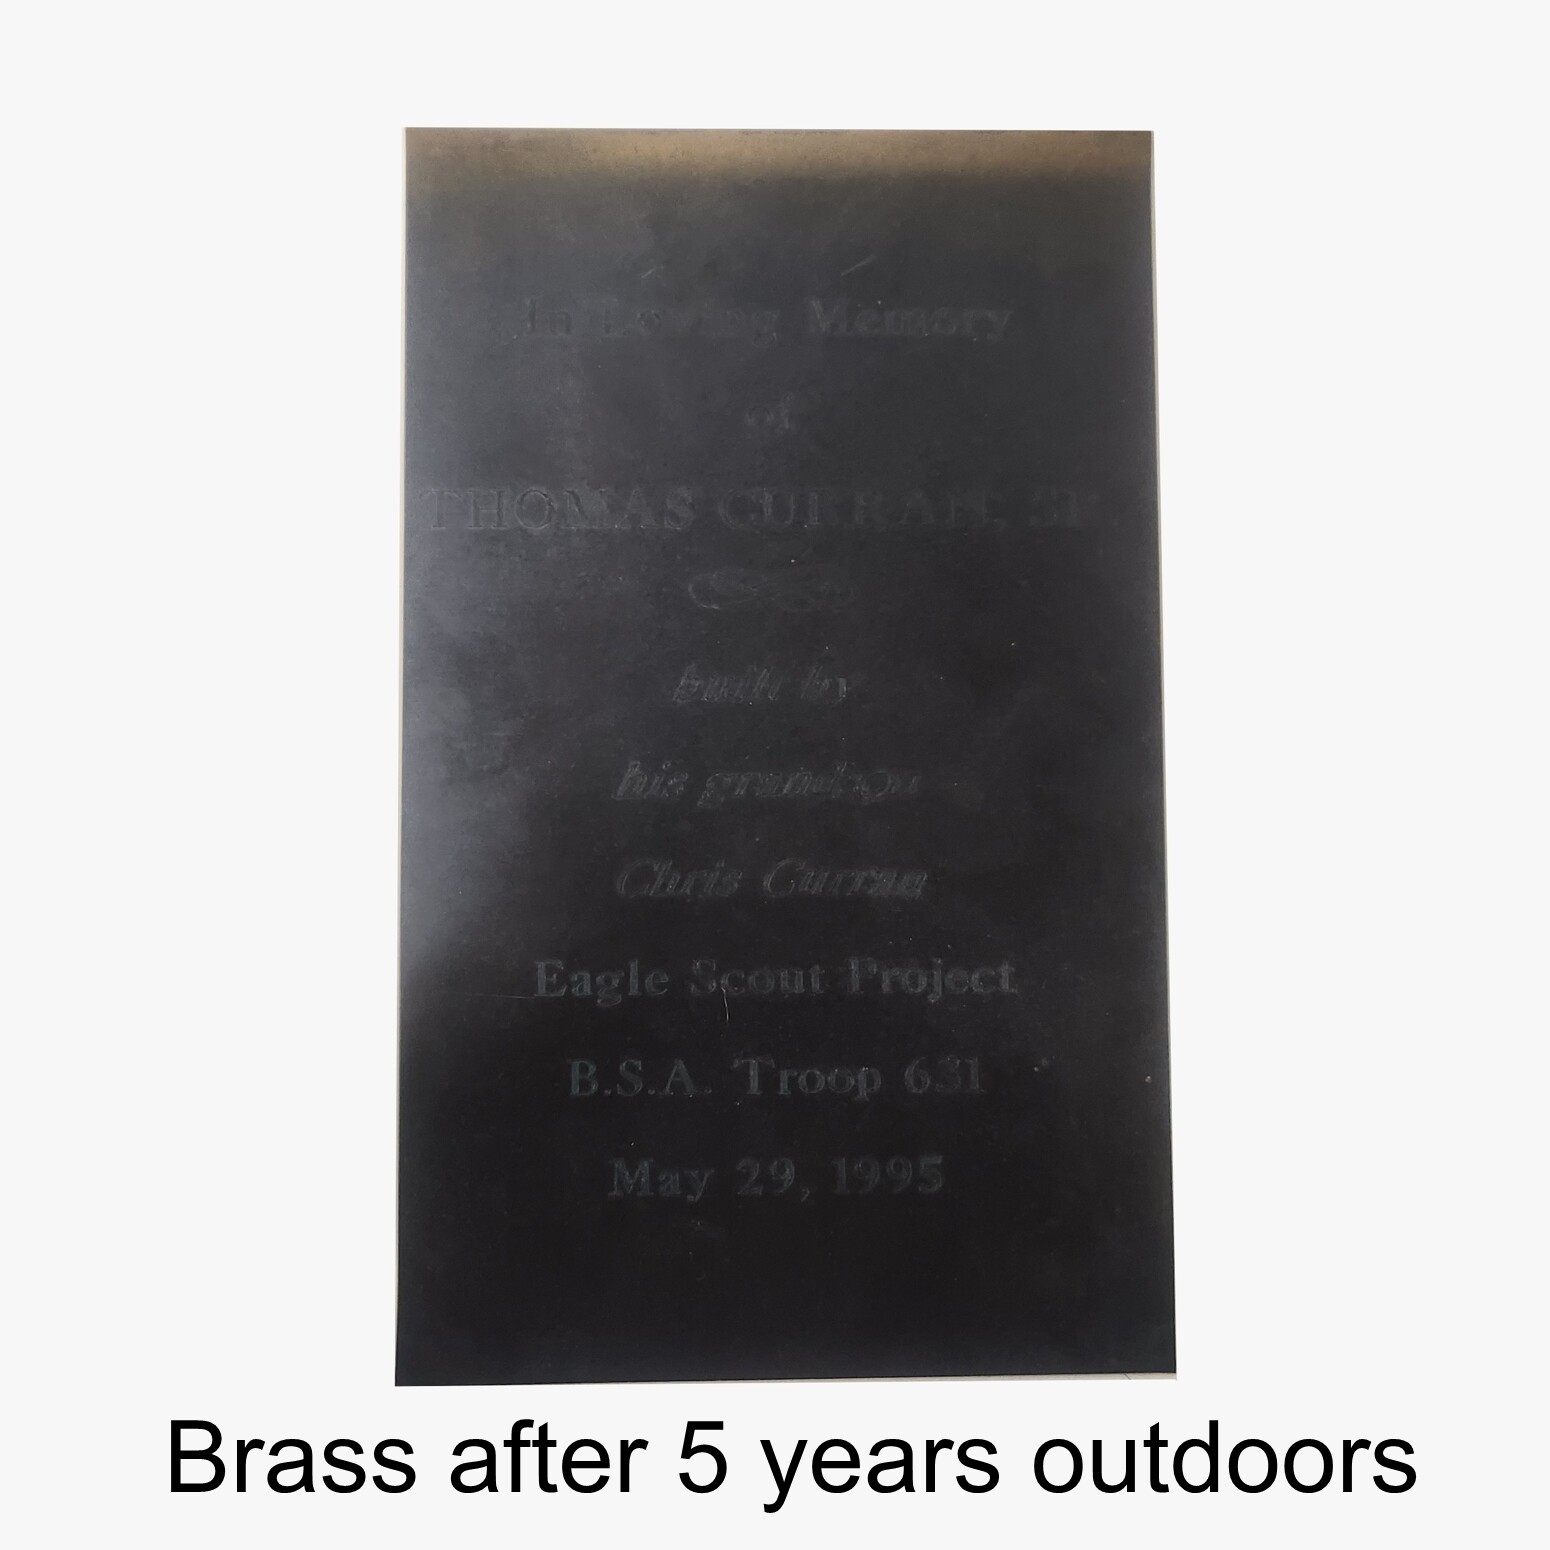 Outdoor Brass - just don't!